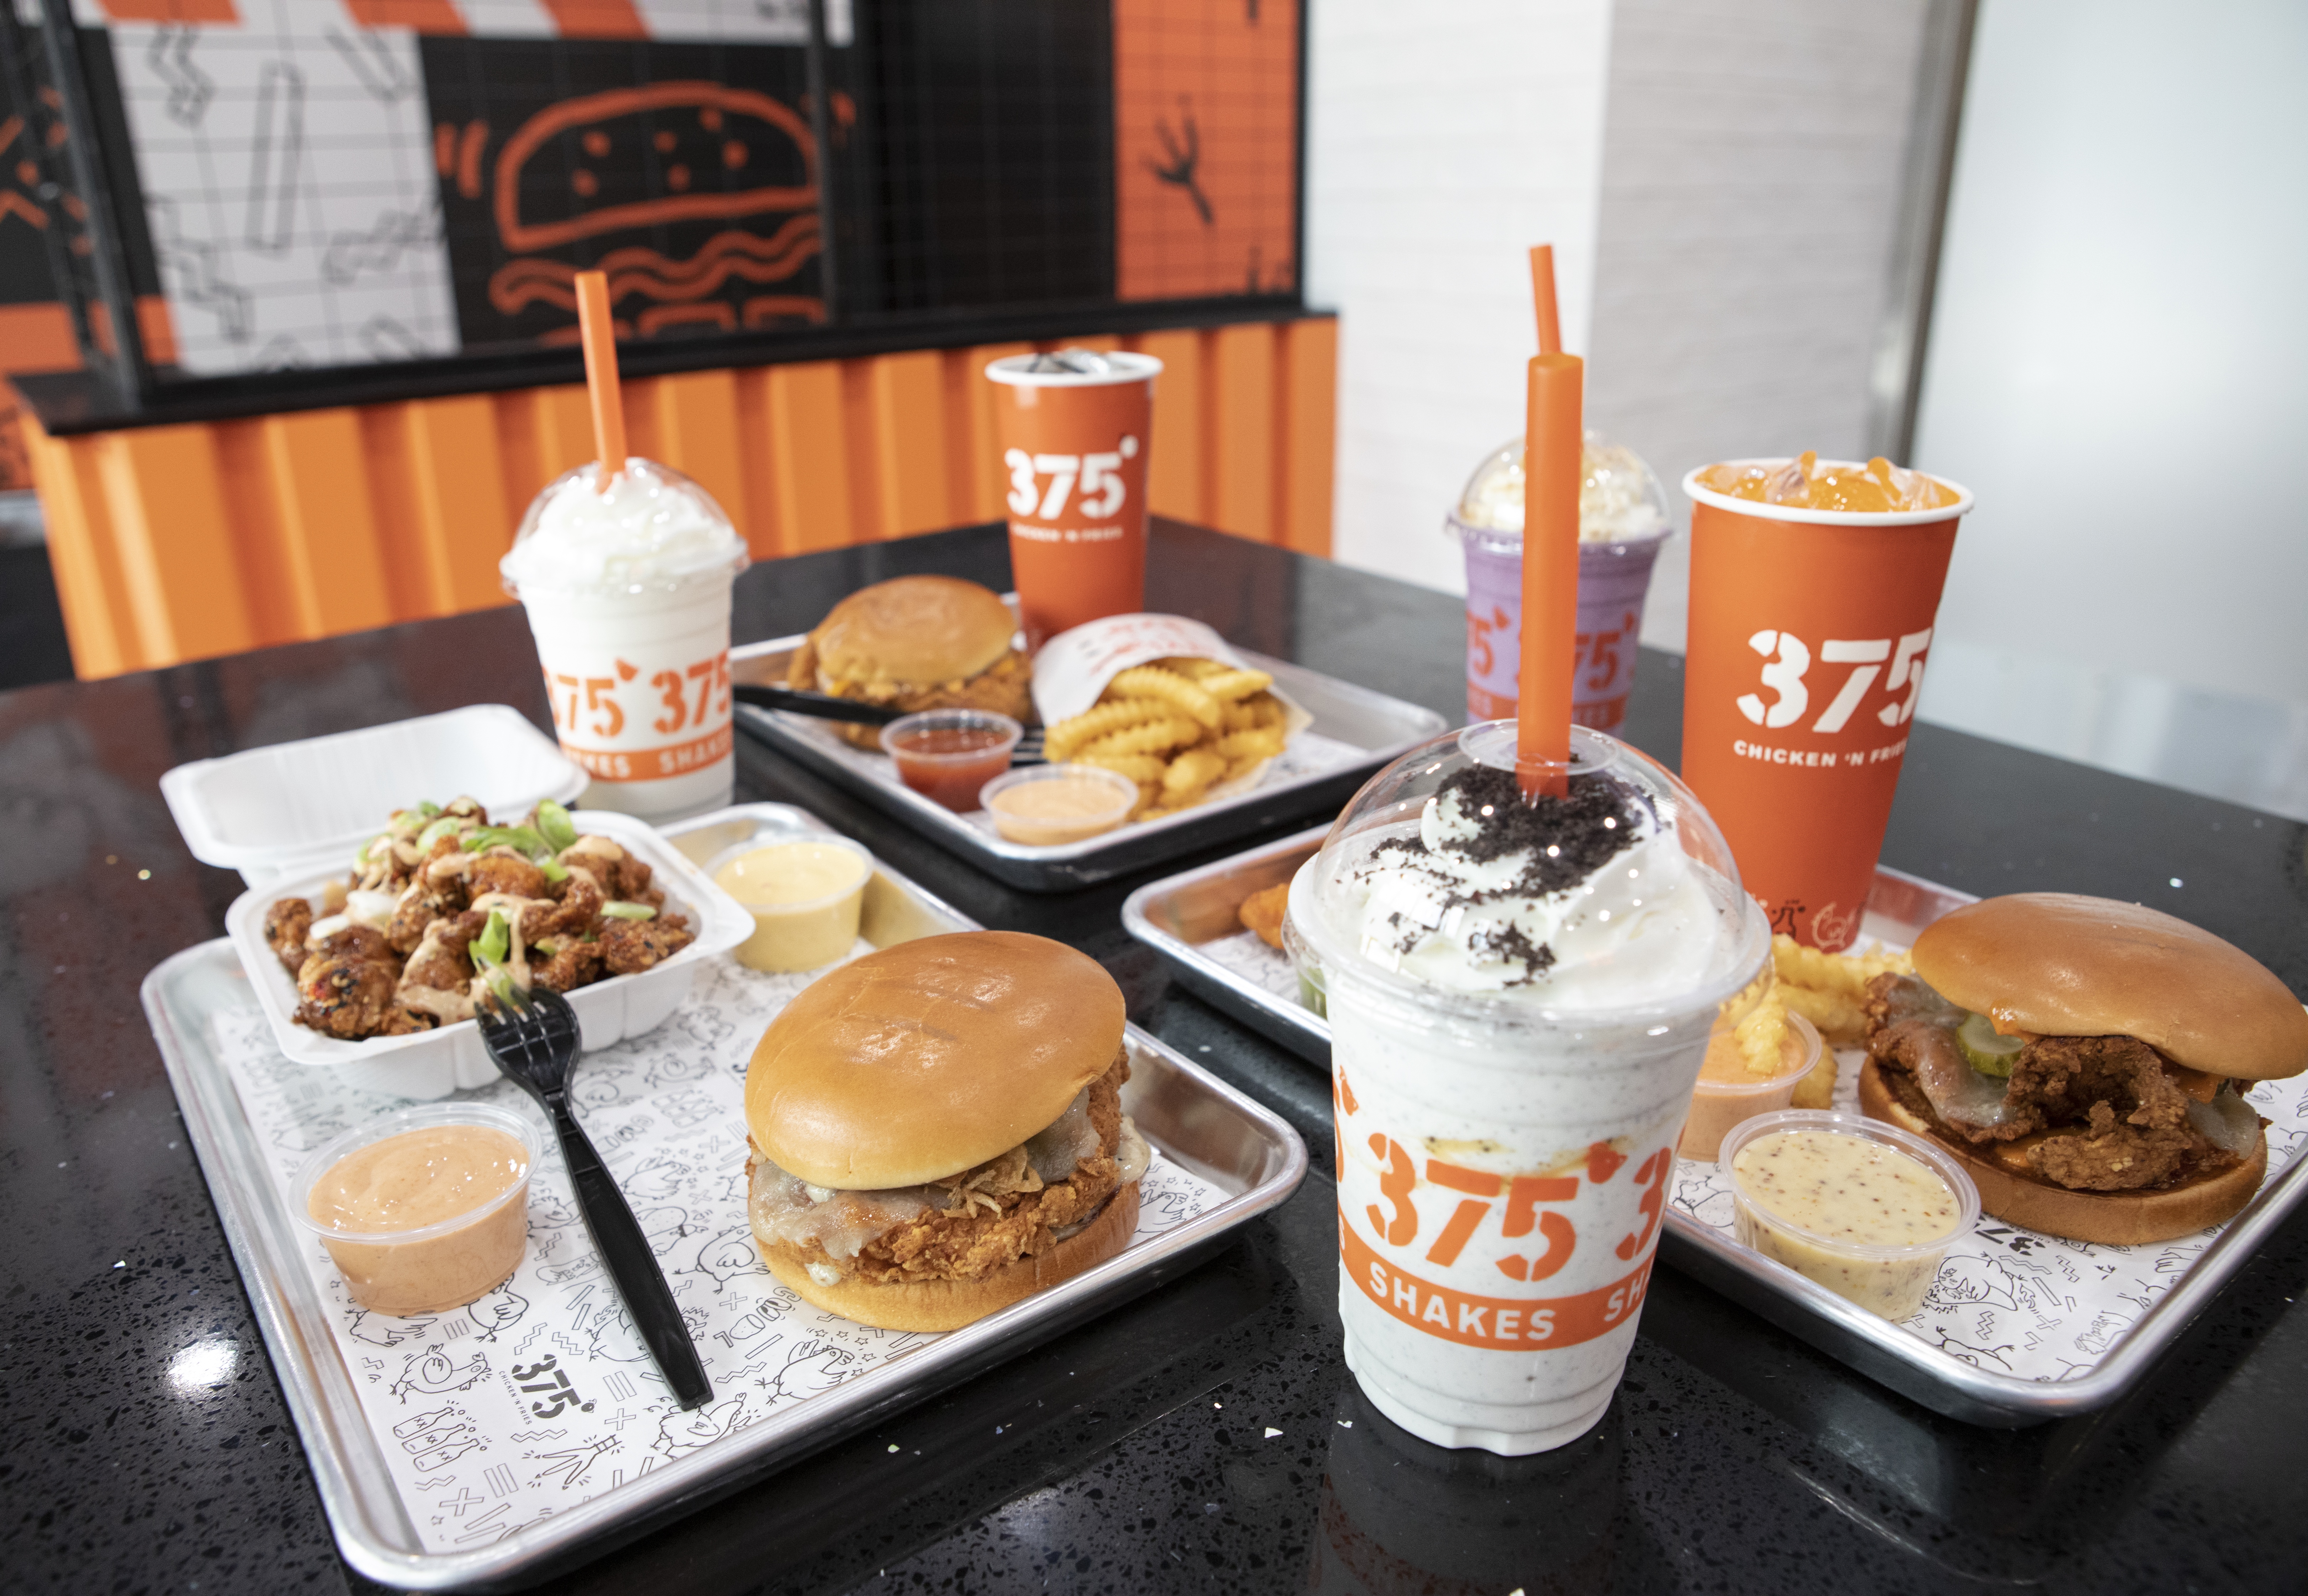 375º Chicken 'N Fries Expands to Open New Outlets in Harlem and the Bronx